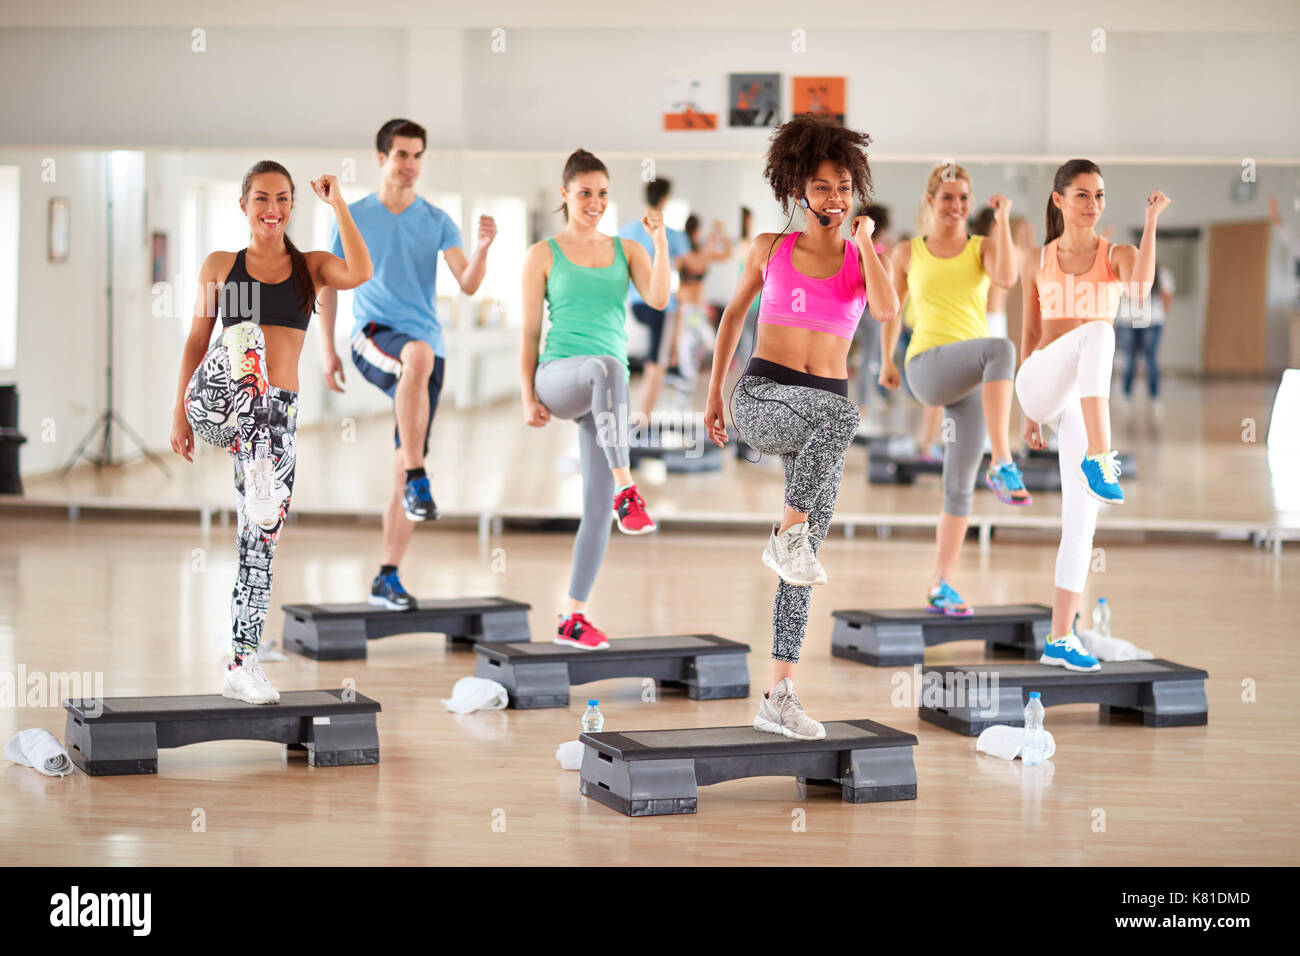 Fitness training in group at gym Stock Photo